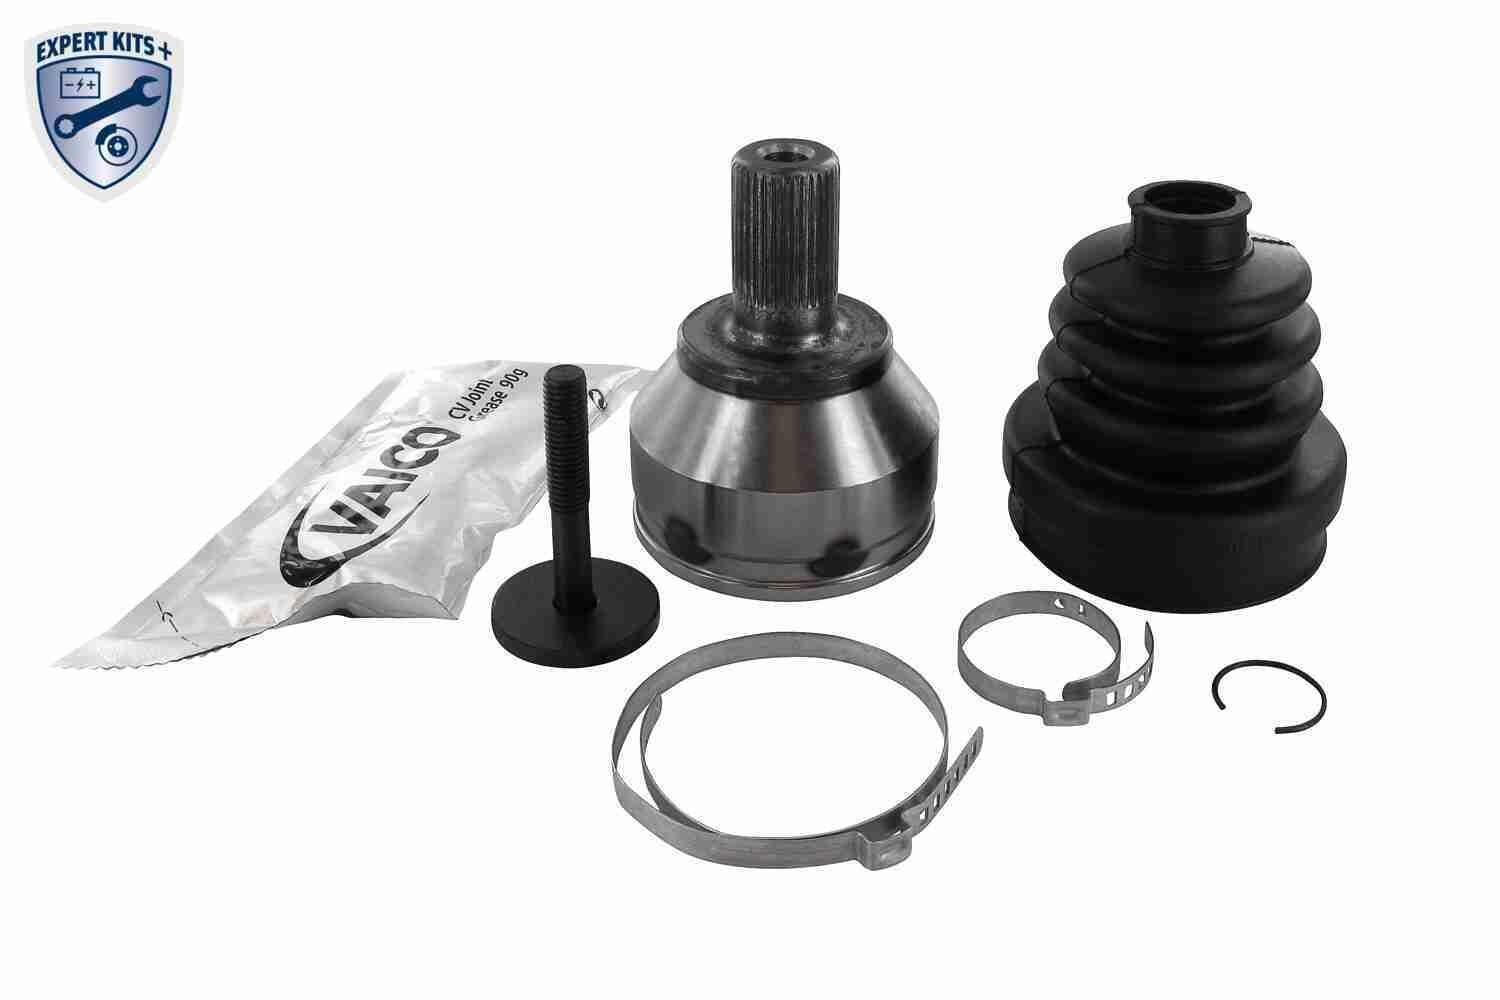 Constant velocity joint VAICO EXPERT KITS +, Wheel Side, without ABS ring - V25-0511